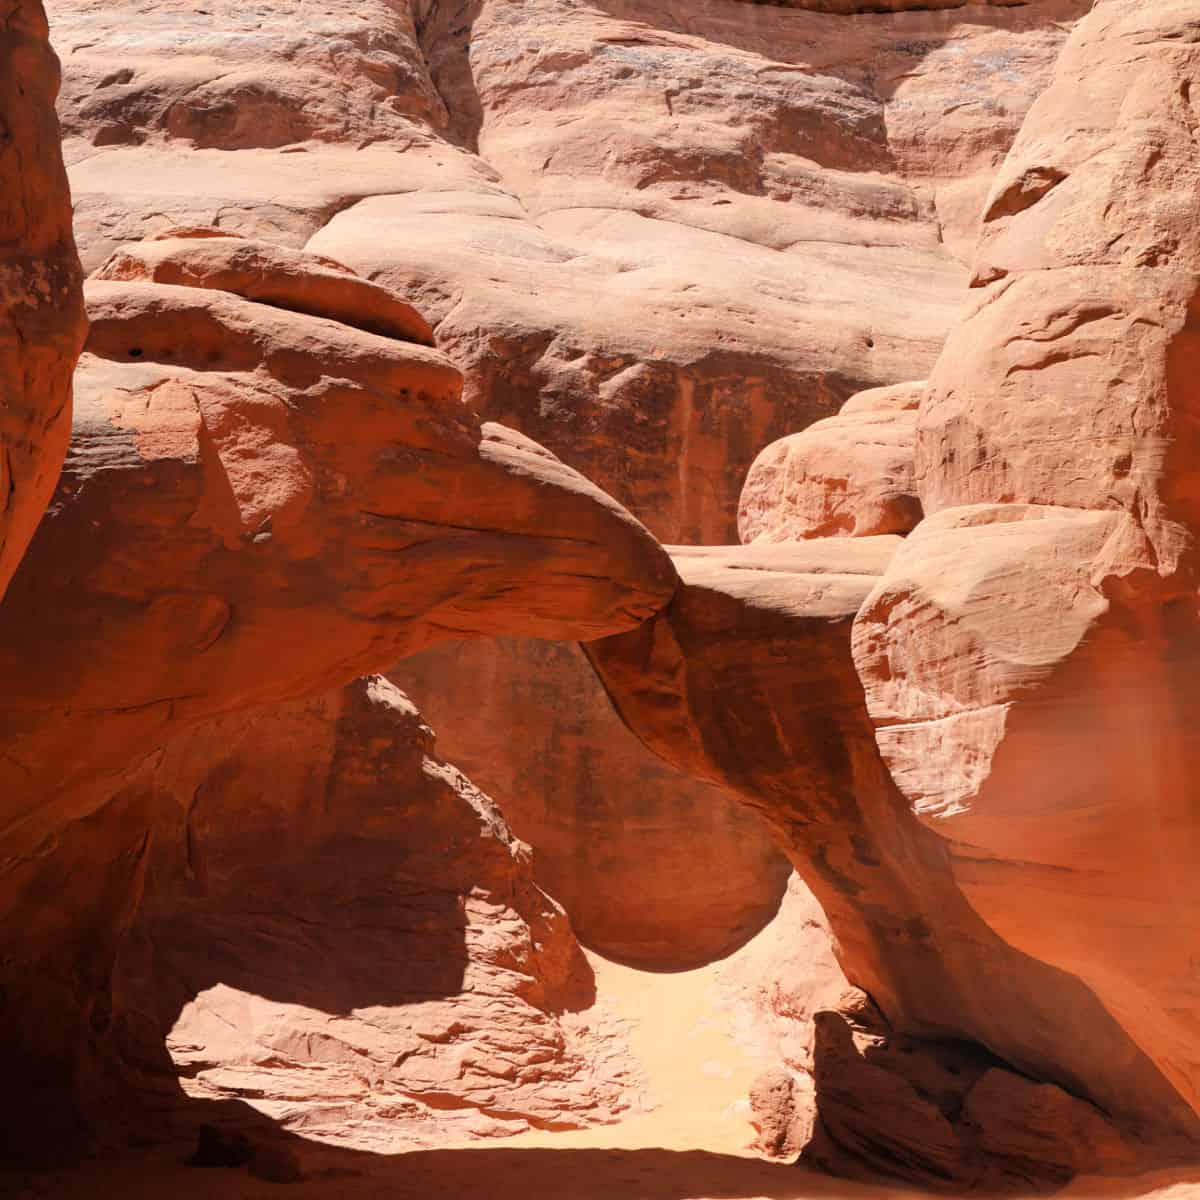 Sand Dune Arch at Arches National Park in Utah